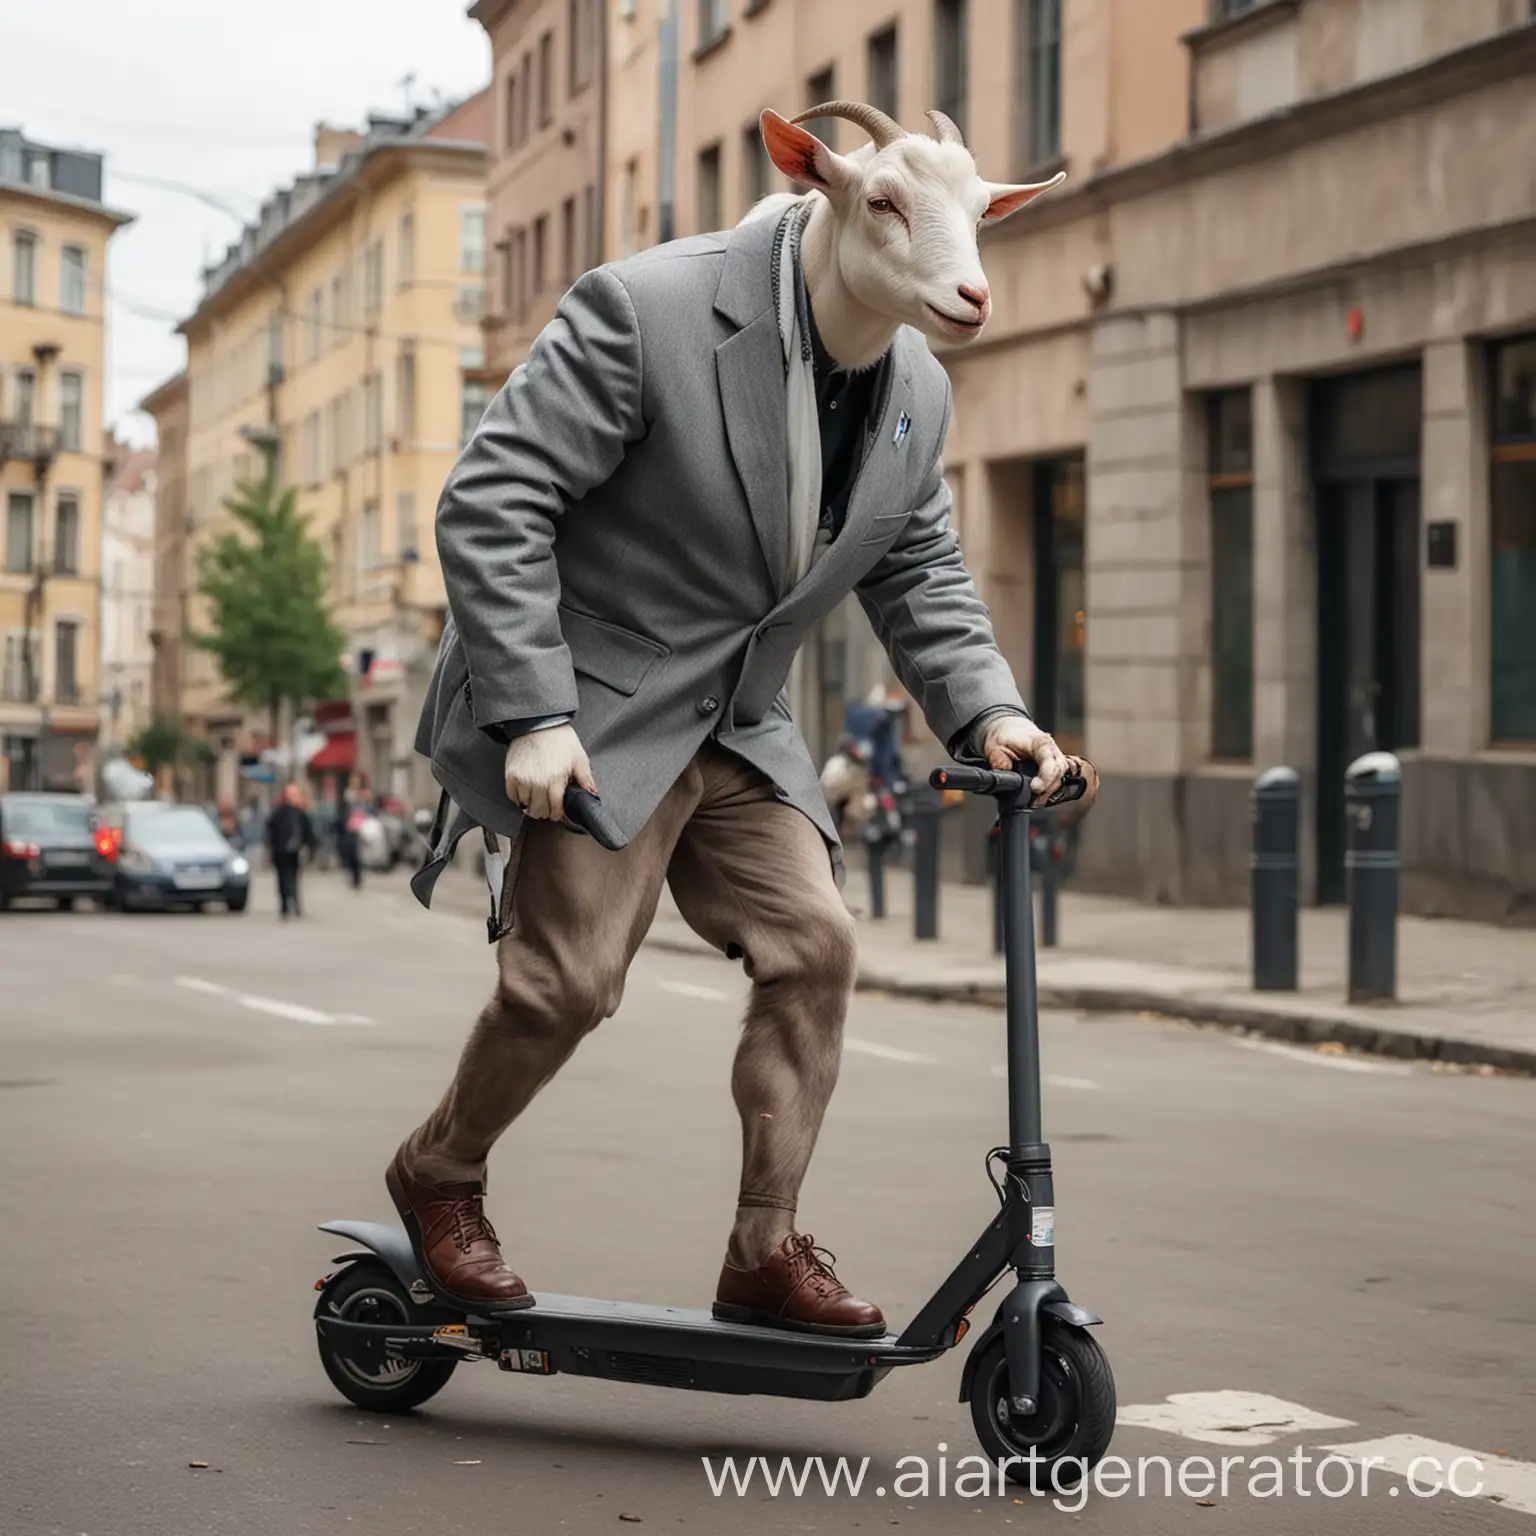 The bald, lousy goat in a gray jacket and with a diplomat in hand rides an electric scooter through the city and is running late by a couple.